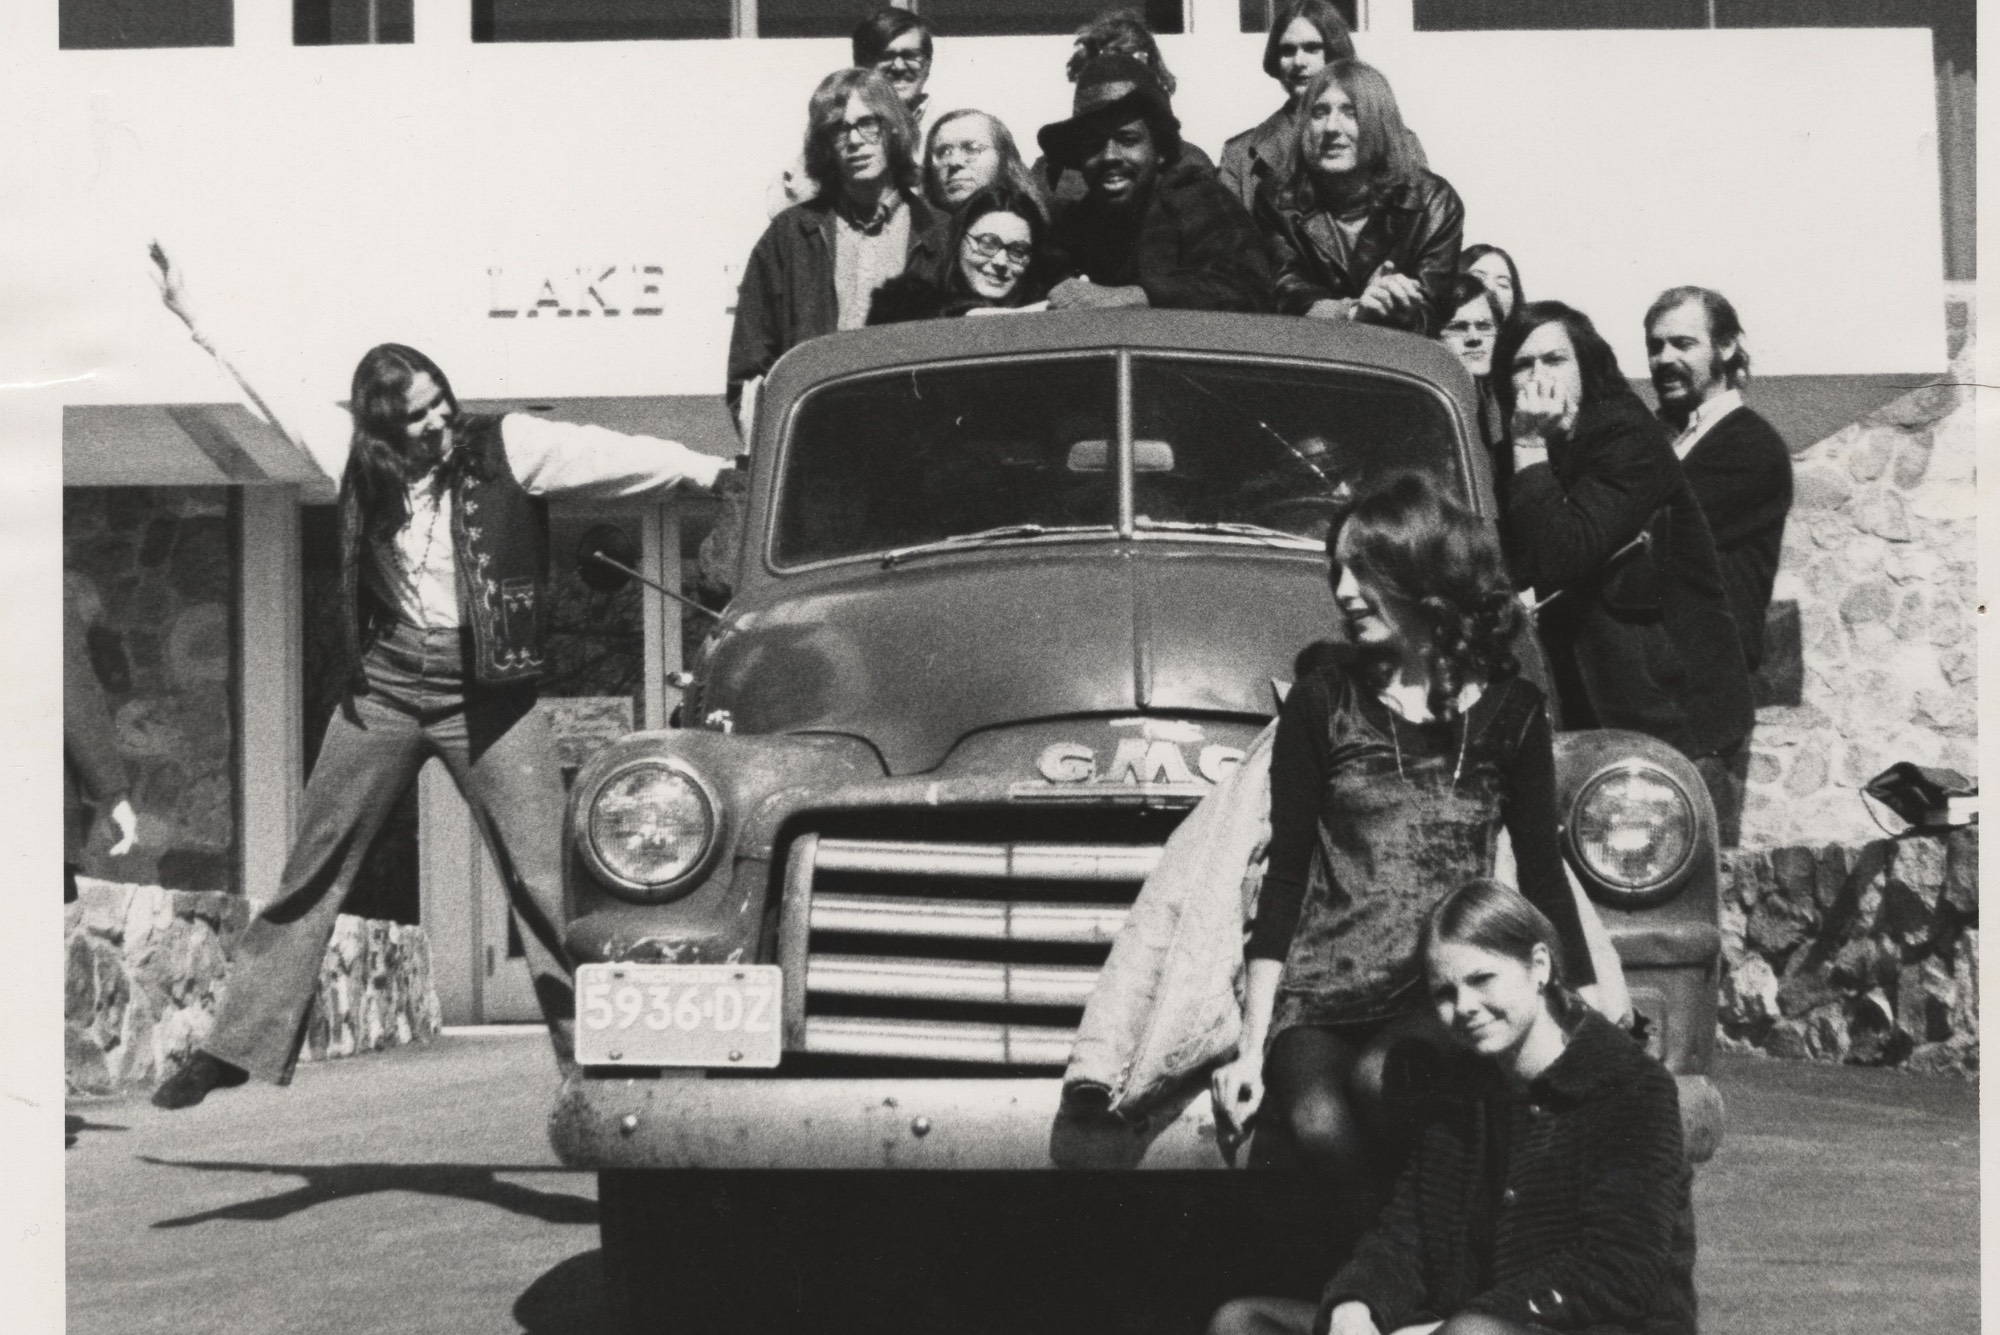 Thomas Jefferson College students posing on truck in front of Lake Huron Hall. Keep on Truckin' poster was based on this series of images.